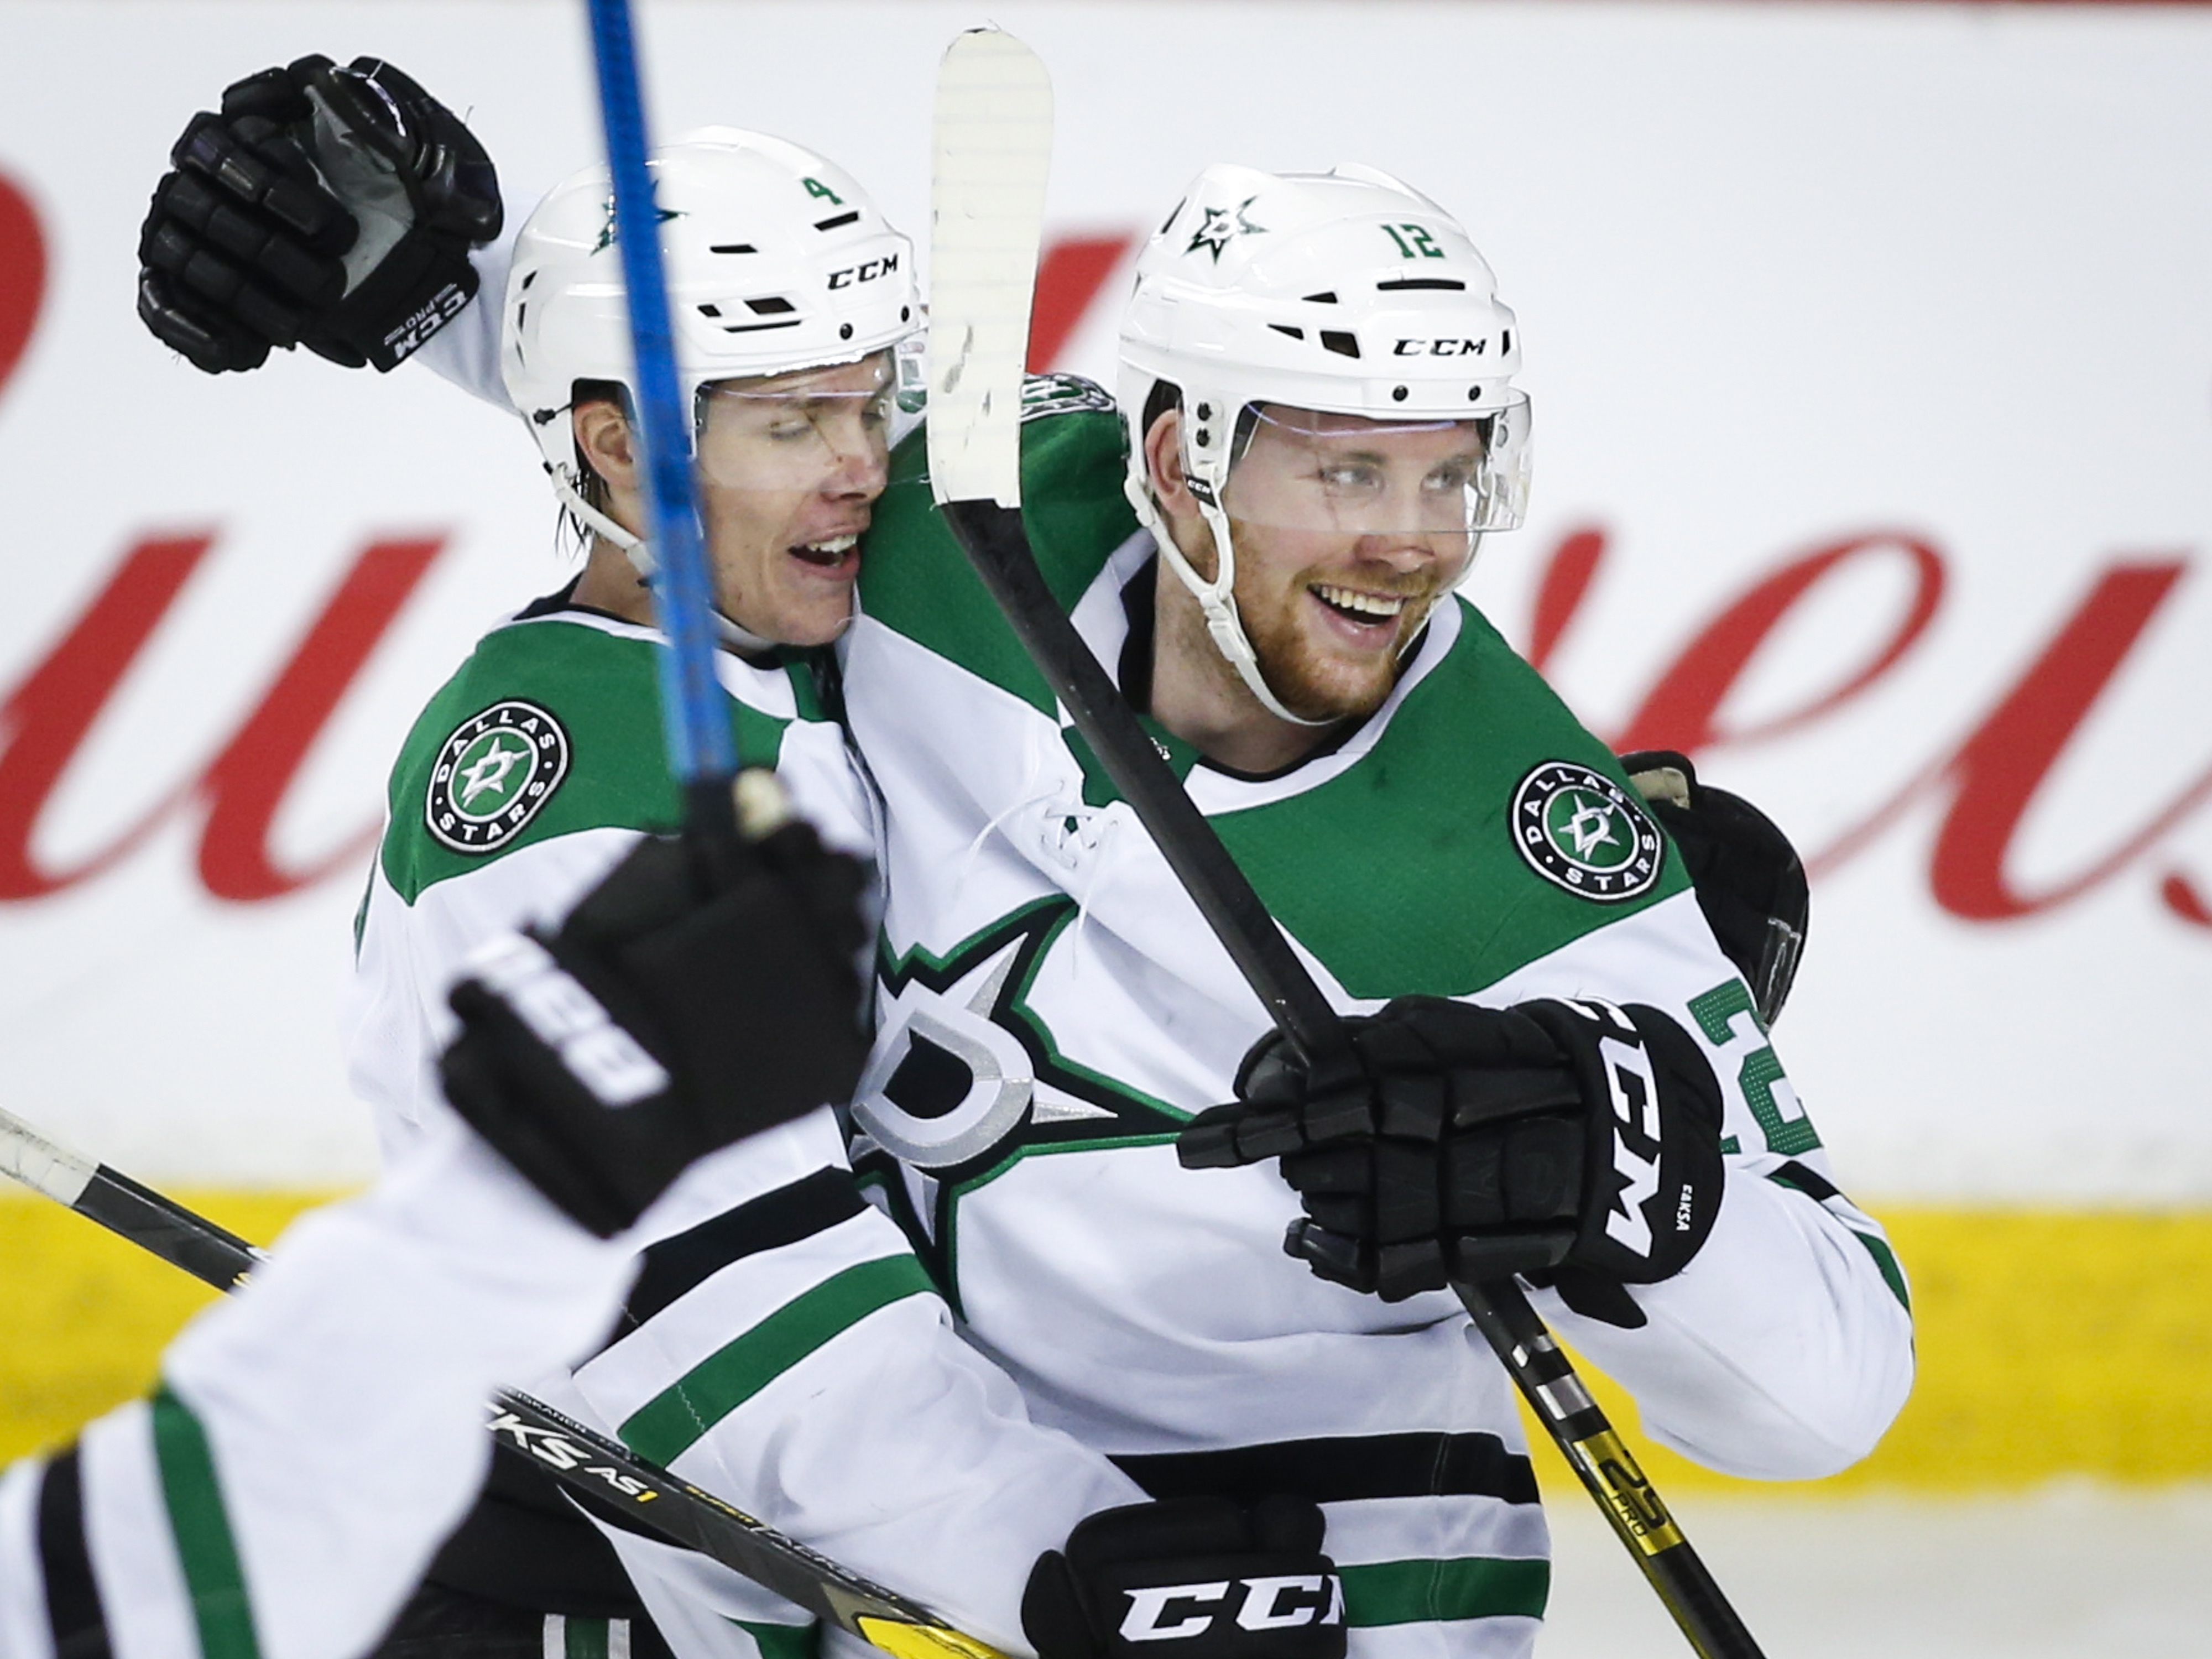 Dallas beats Calgary 2-1; Bishop exits with apparent injury